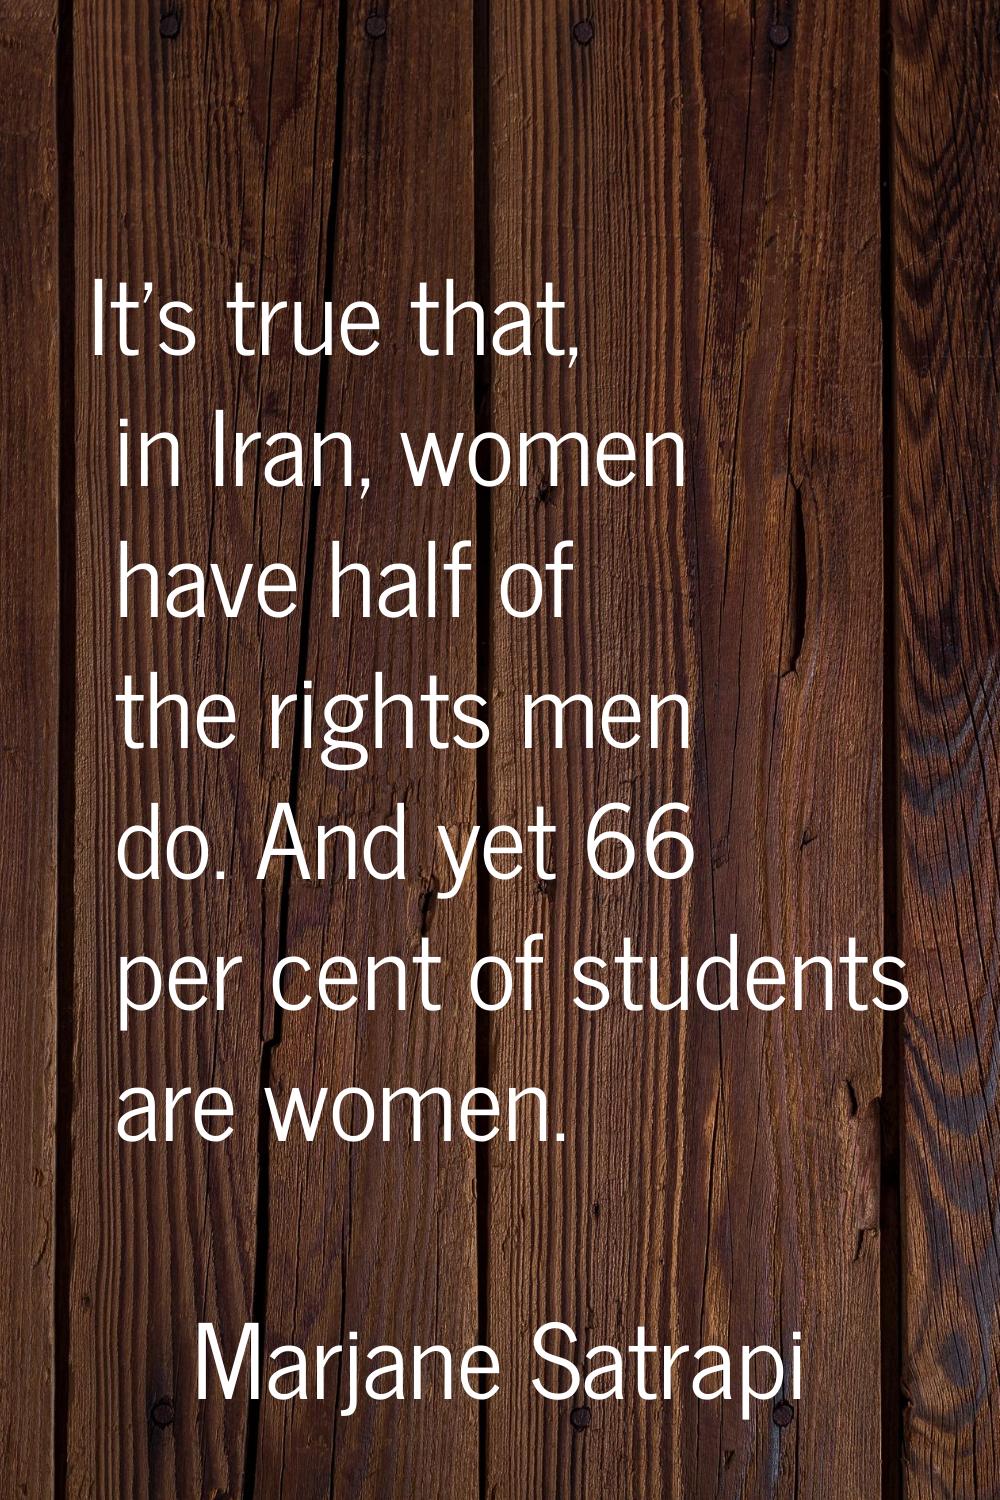 It's true that, in Iran, women have half of the rights men do. And yet 66 per cent of students are 